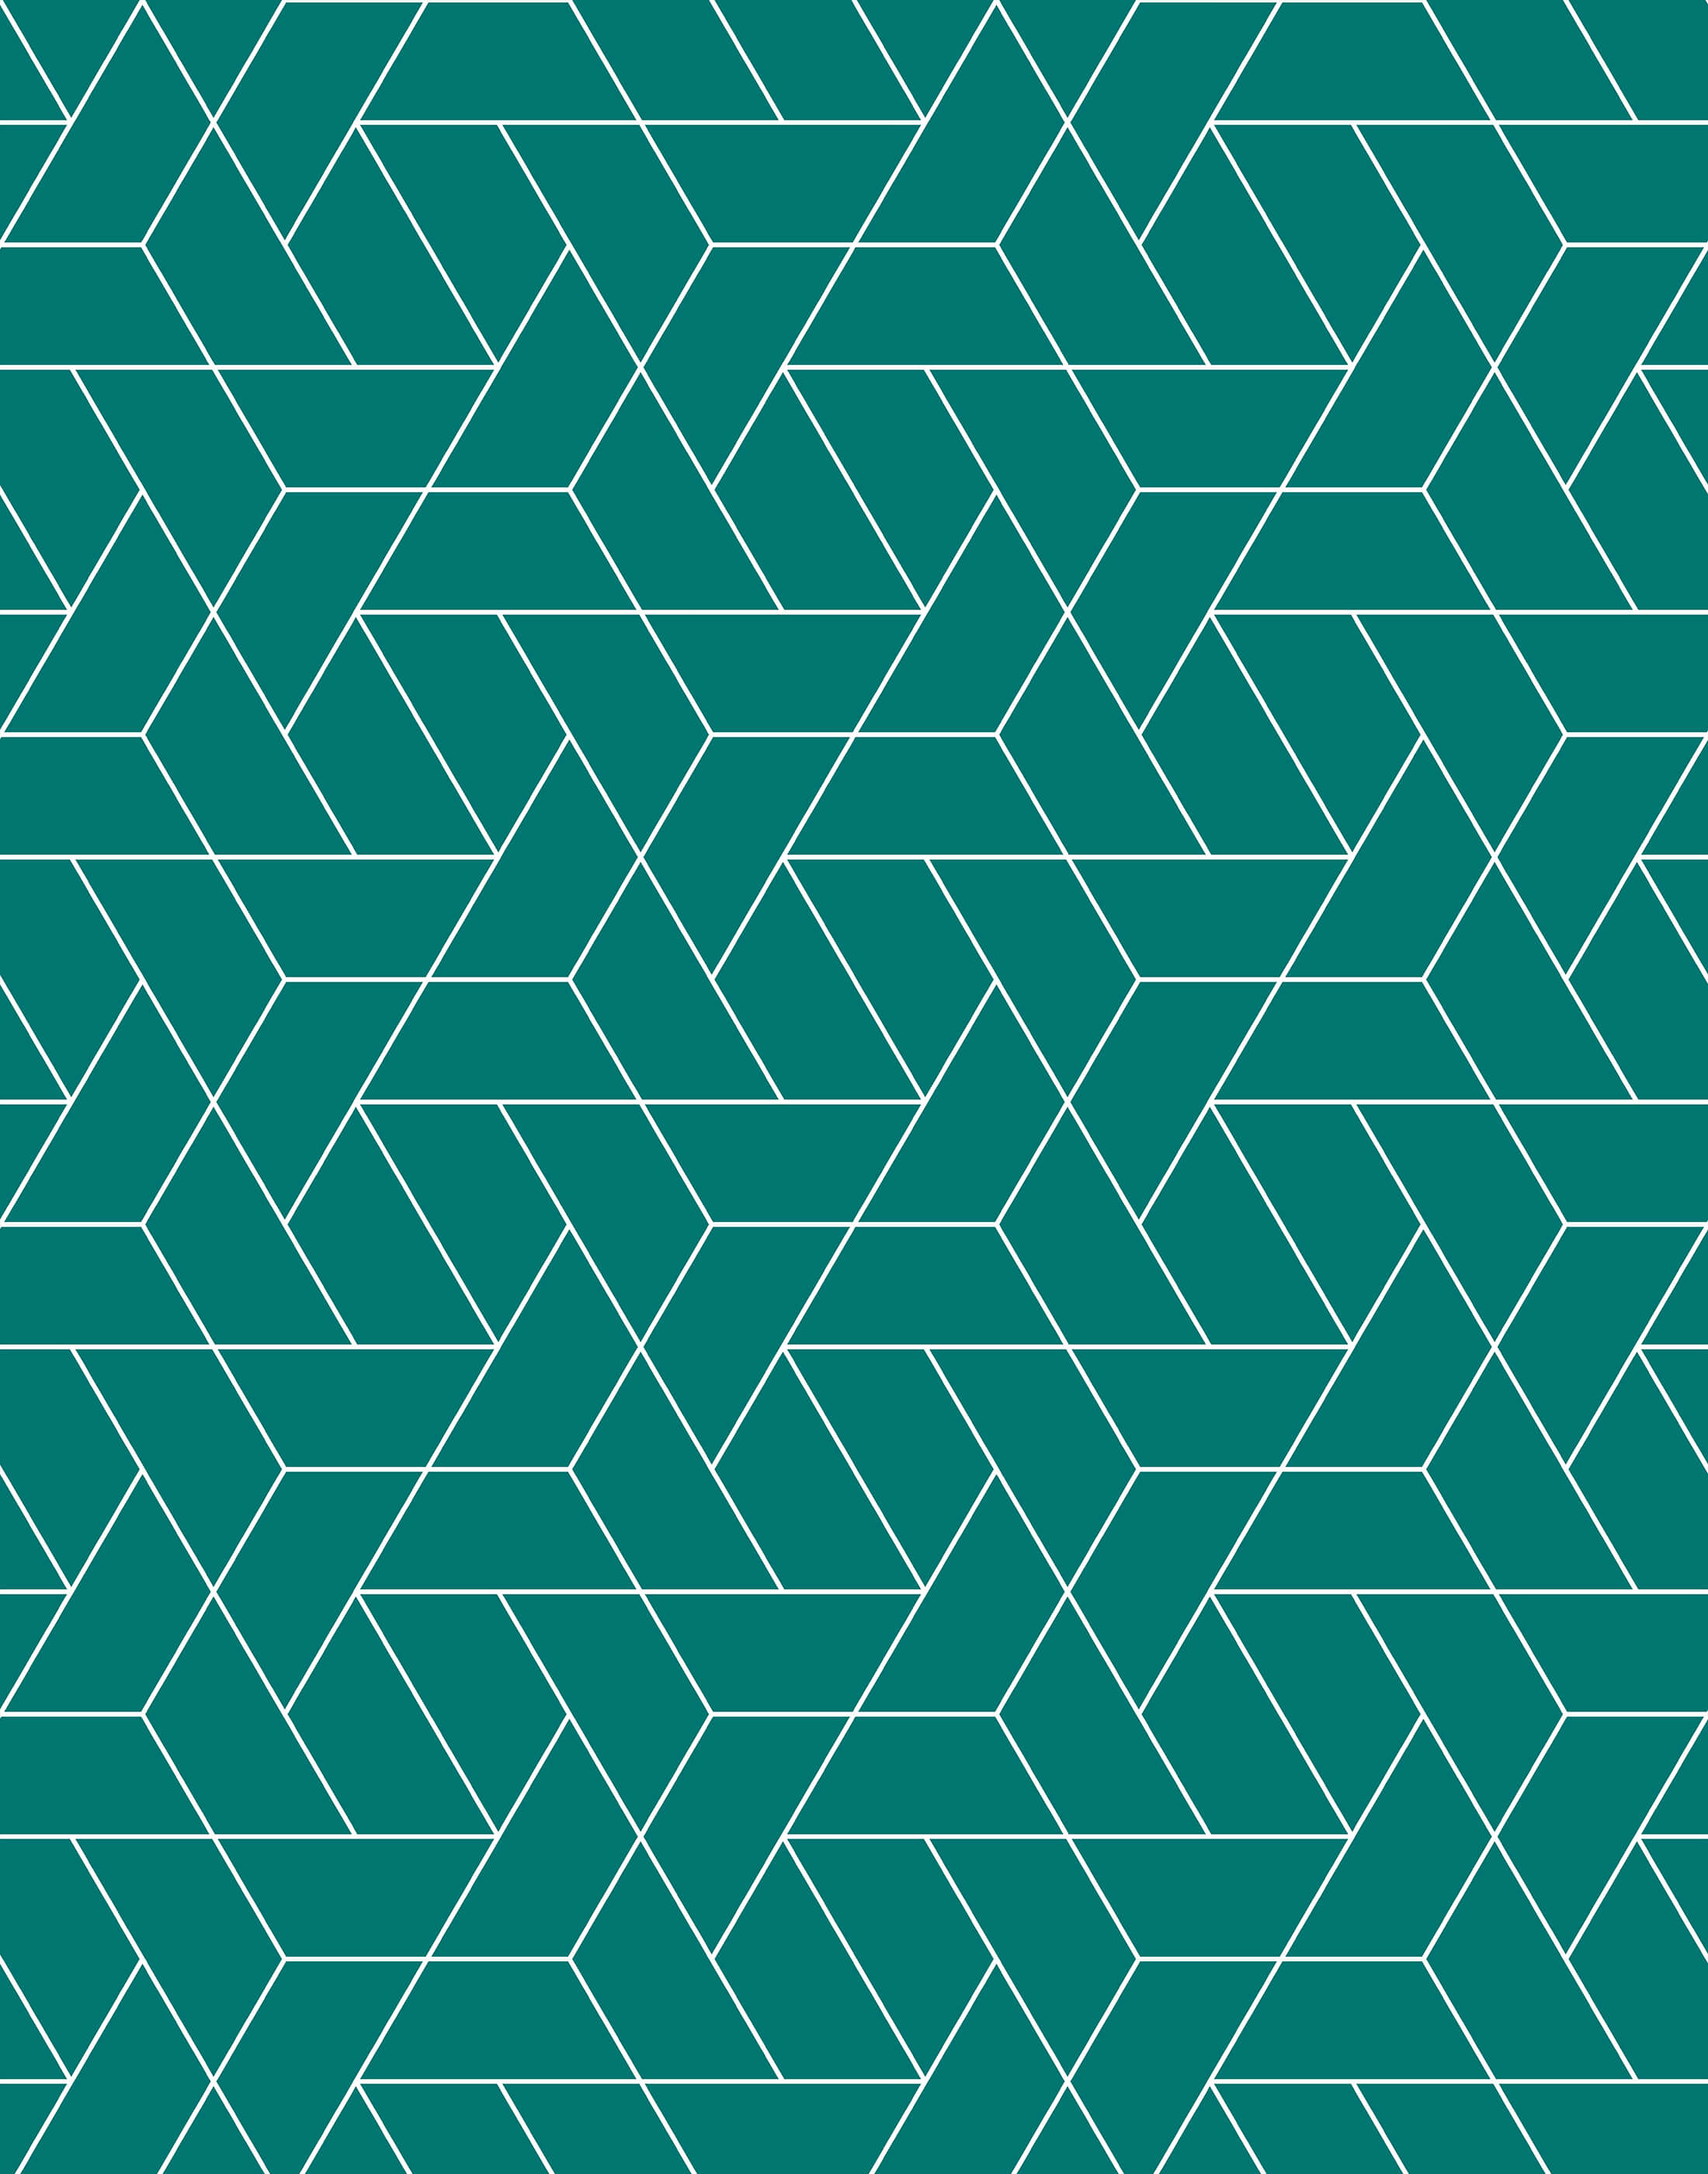 Teal Wallpaper Photos Download The BEST Free Teal Wallpaper Stock Photos   HD Images